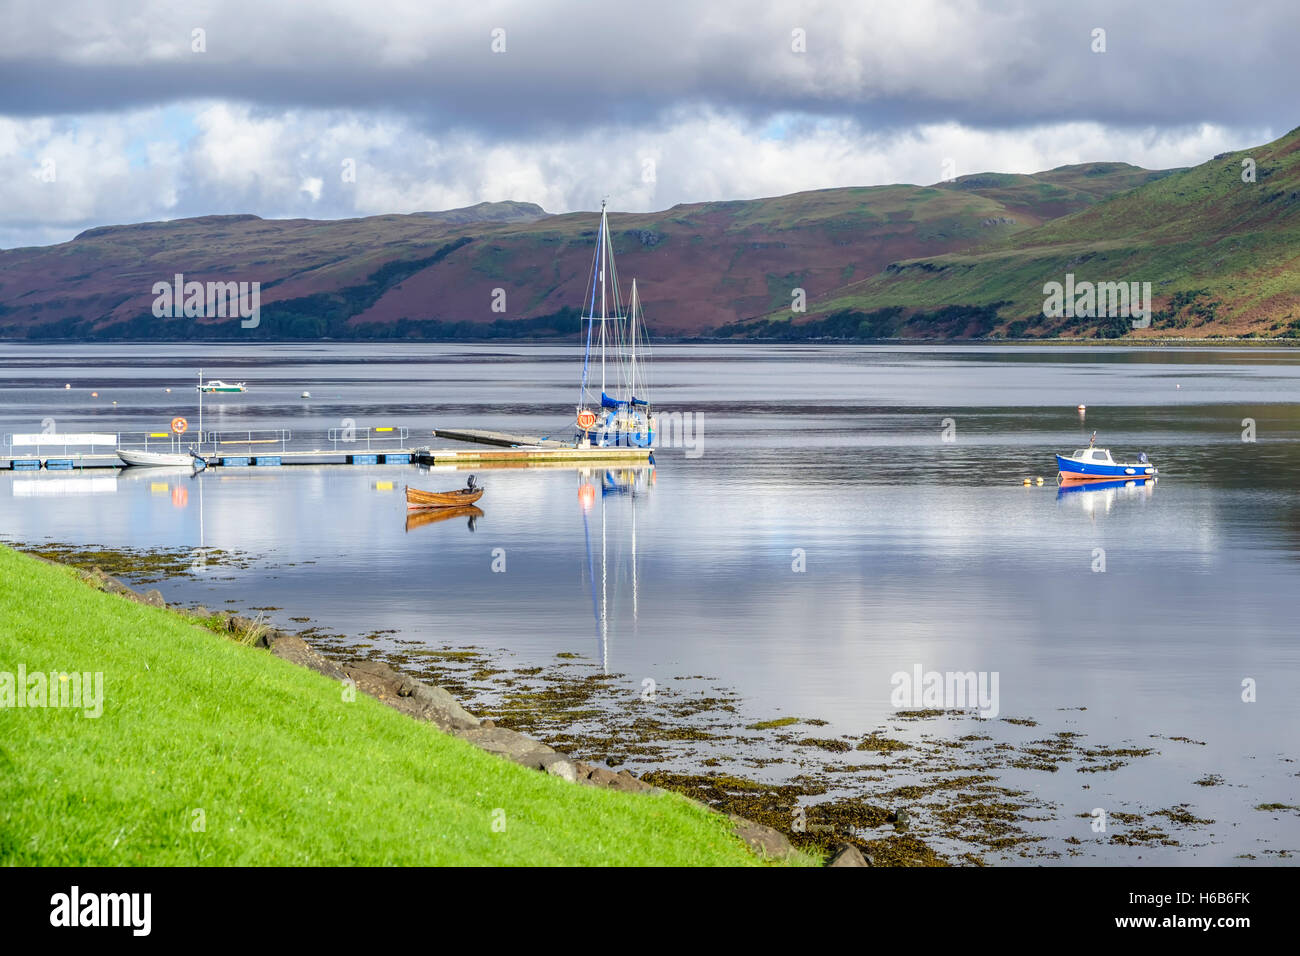 Boats and their reflections on the beautiful calm waters of Loch Harport at Carbost Isle of Skye Scotland with hills of purple h Stock Photo